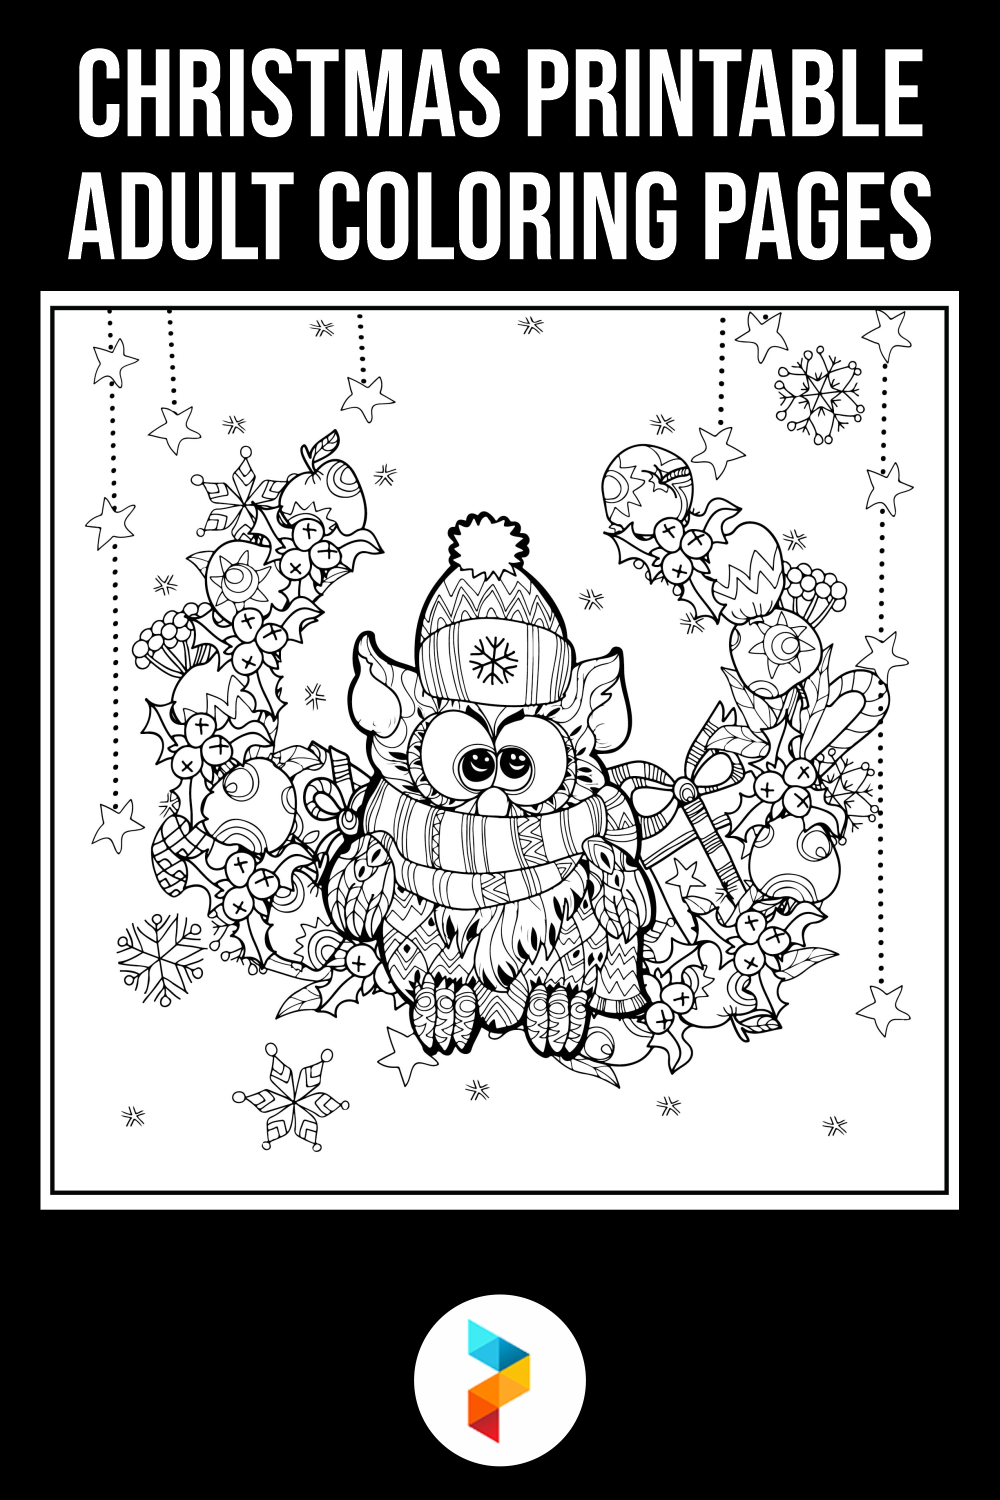 Christmas Printable Adult Coloring Pages